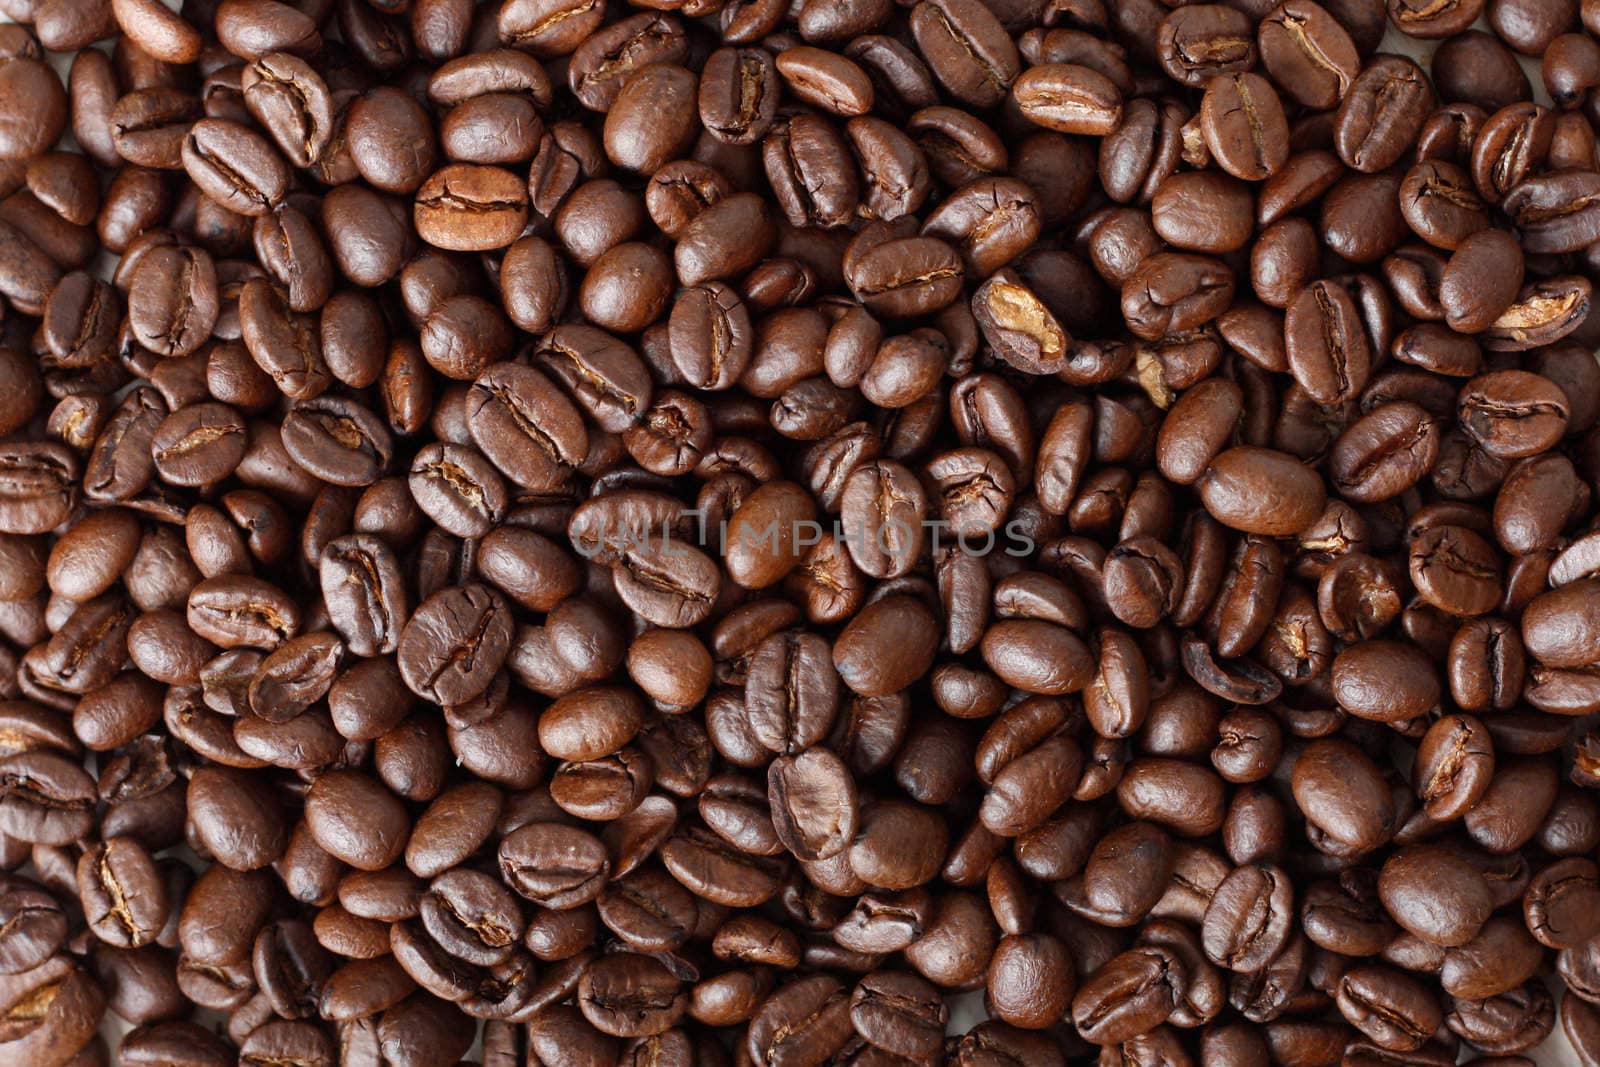 A wallpaper coffee background